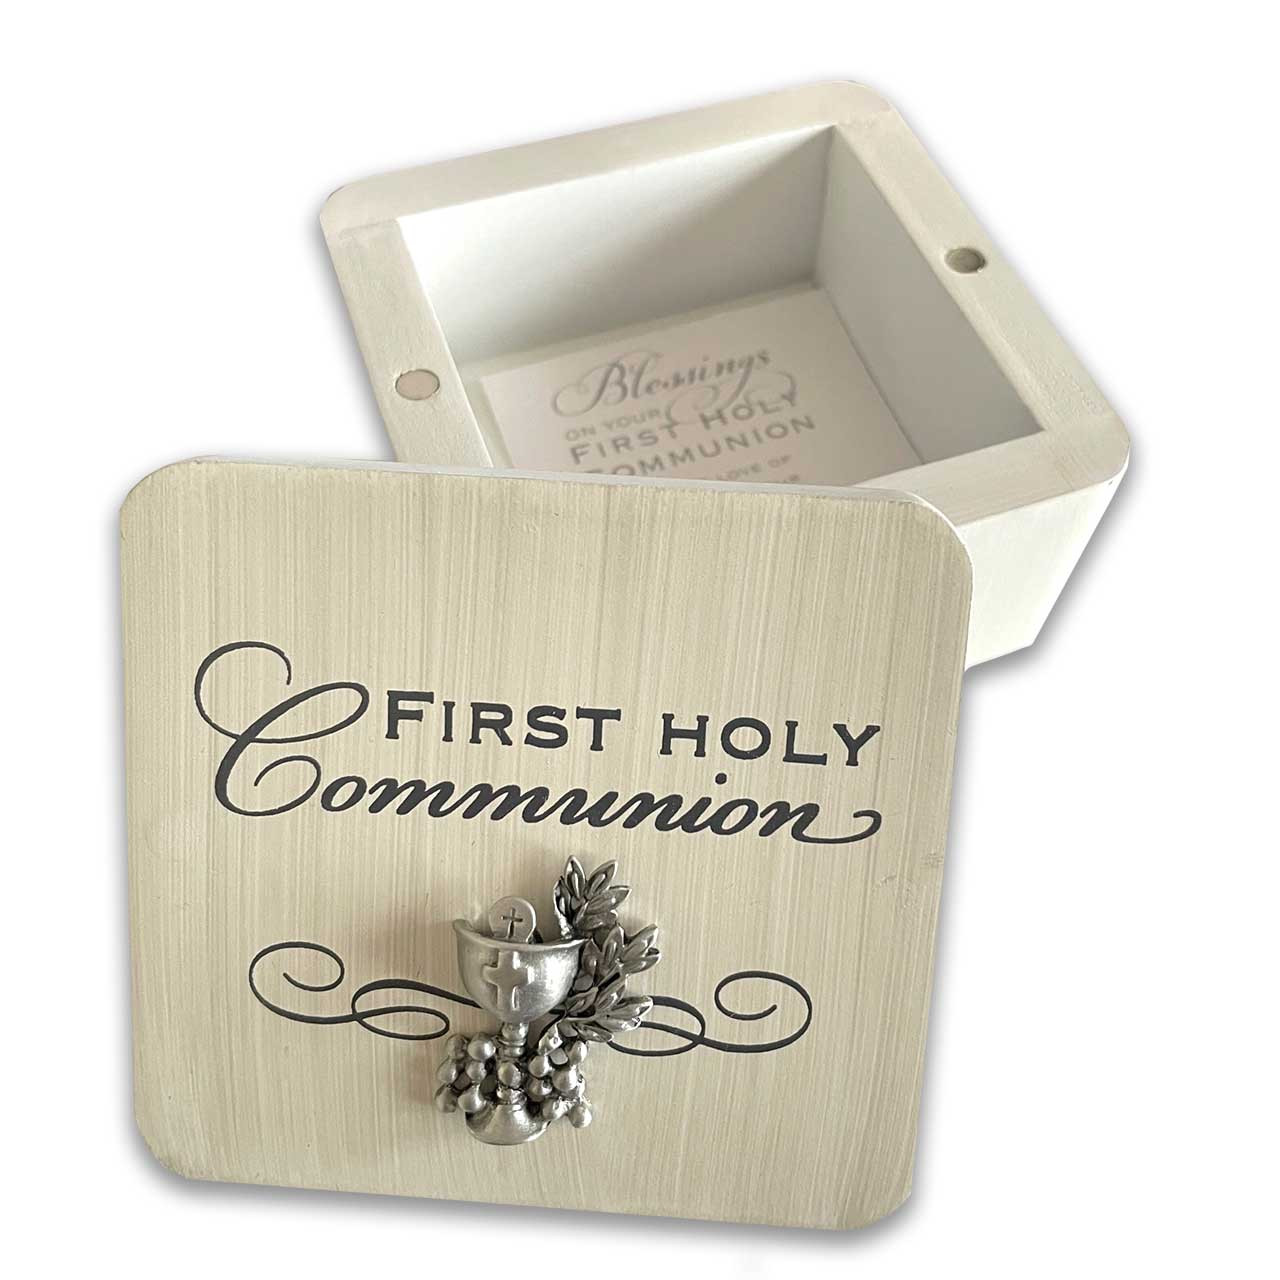 White First Communion Keepsake Box showing magnetic closure lid